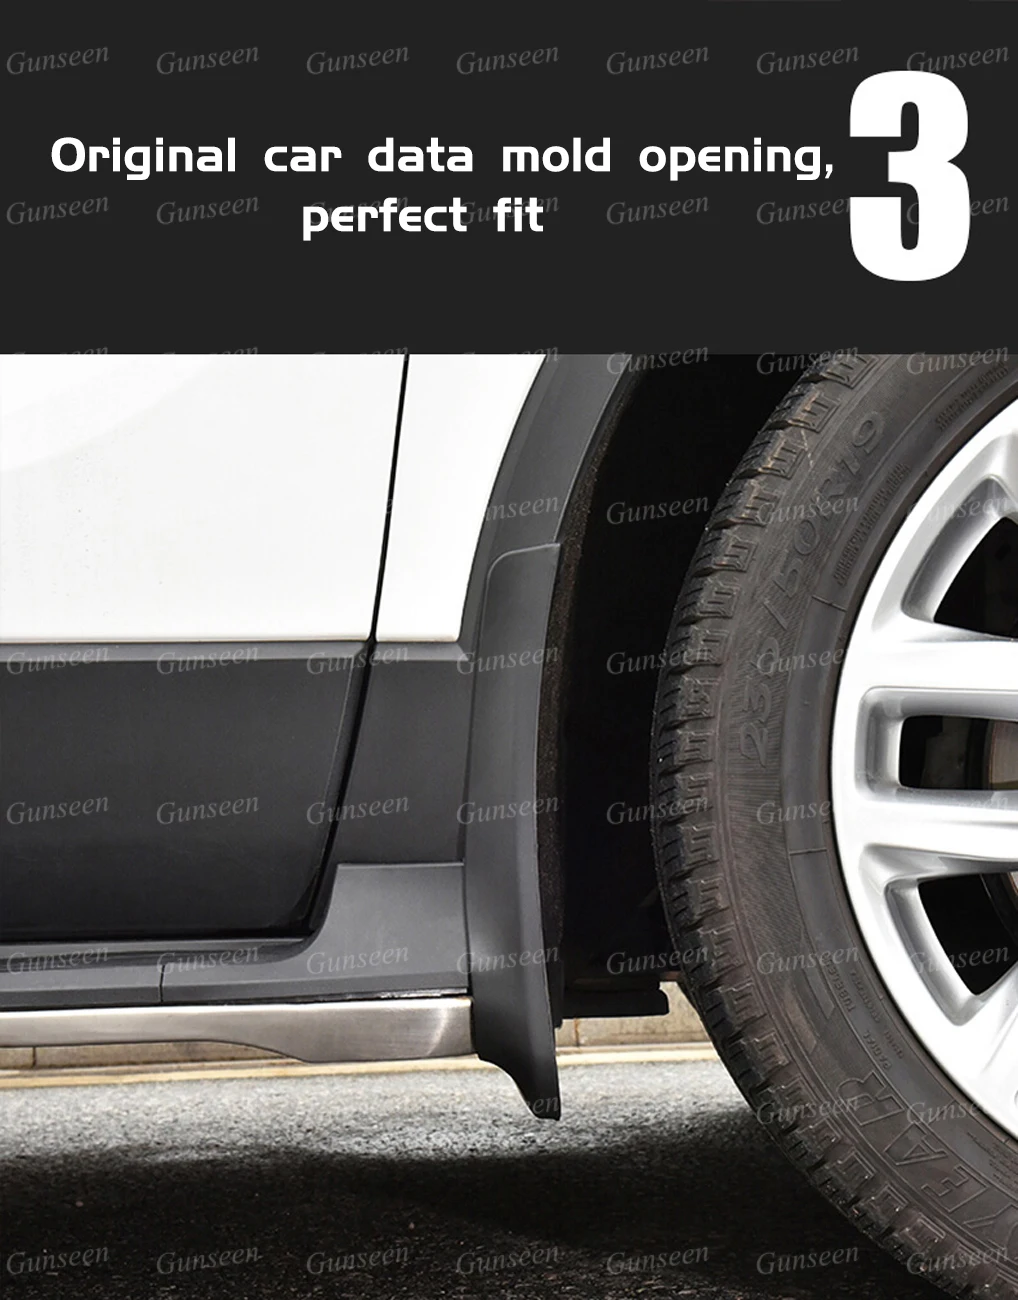 Set For Toyota Corolla E210 Touring Sports Estate 2019 - 2023 Front Rear  Car Mud Flaps Splash Guards Accessories 2020 2021 2022 - AliExpress